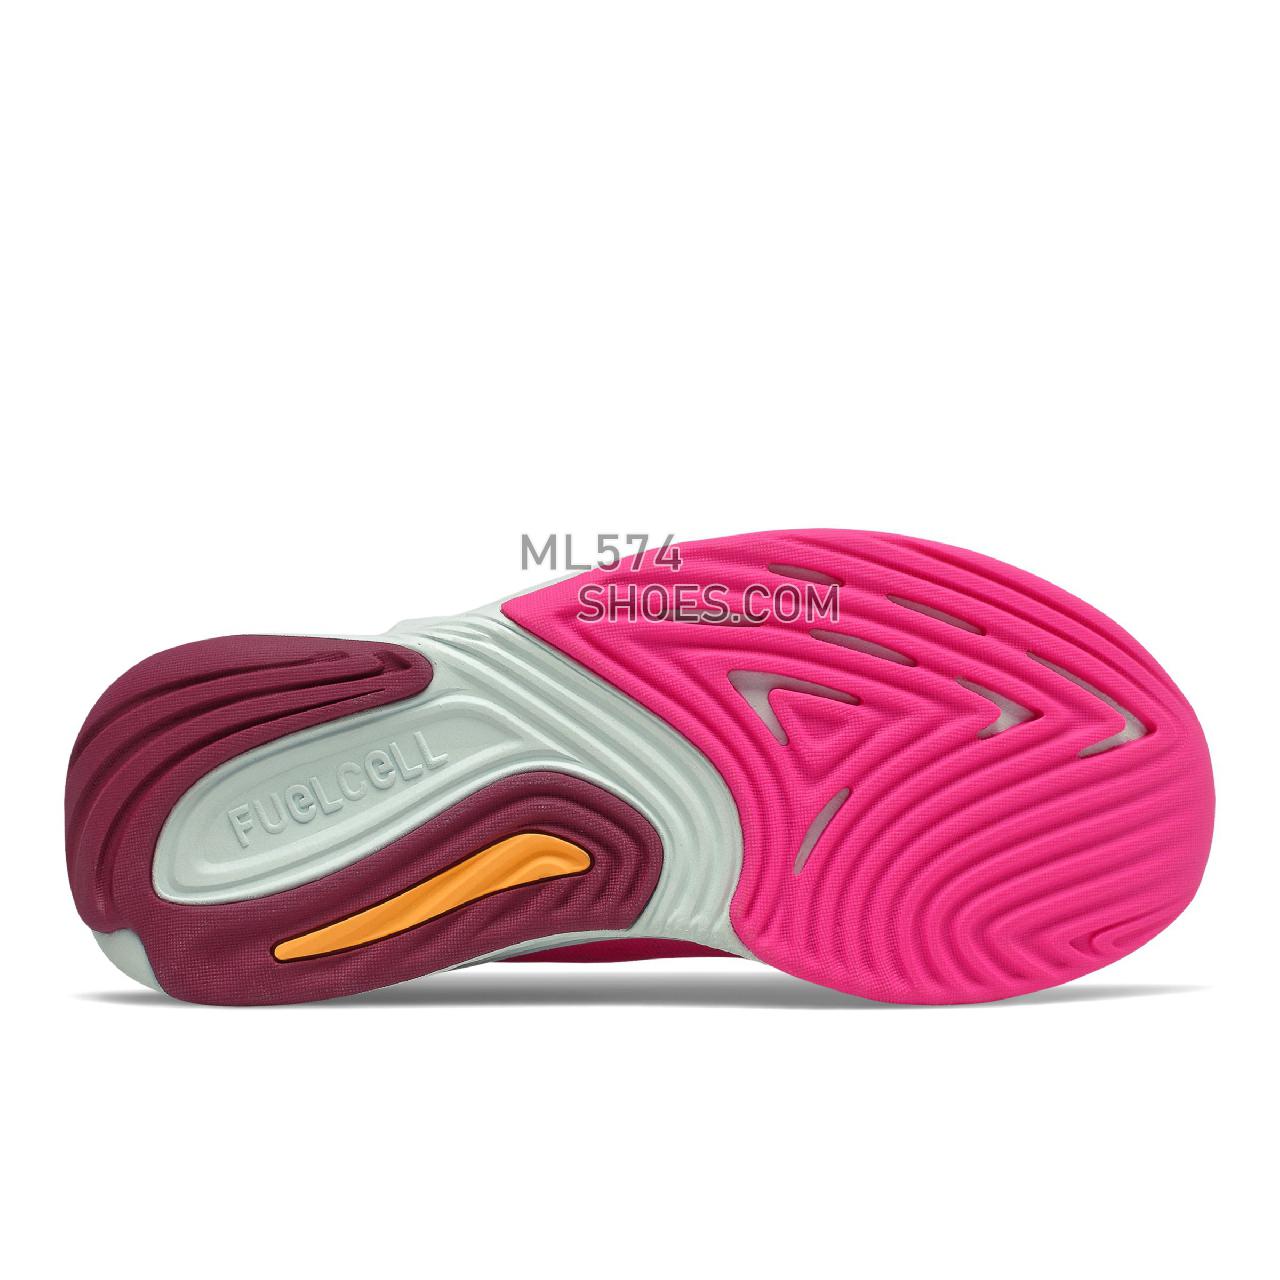 New Balance FuelCell Prism v2 - Women's Stability Running - Pink Glo with Garnet - WFCPZLP2